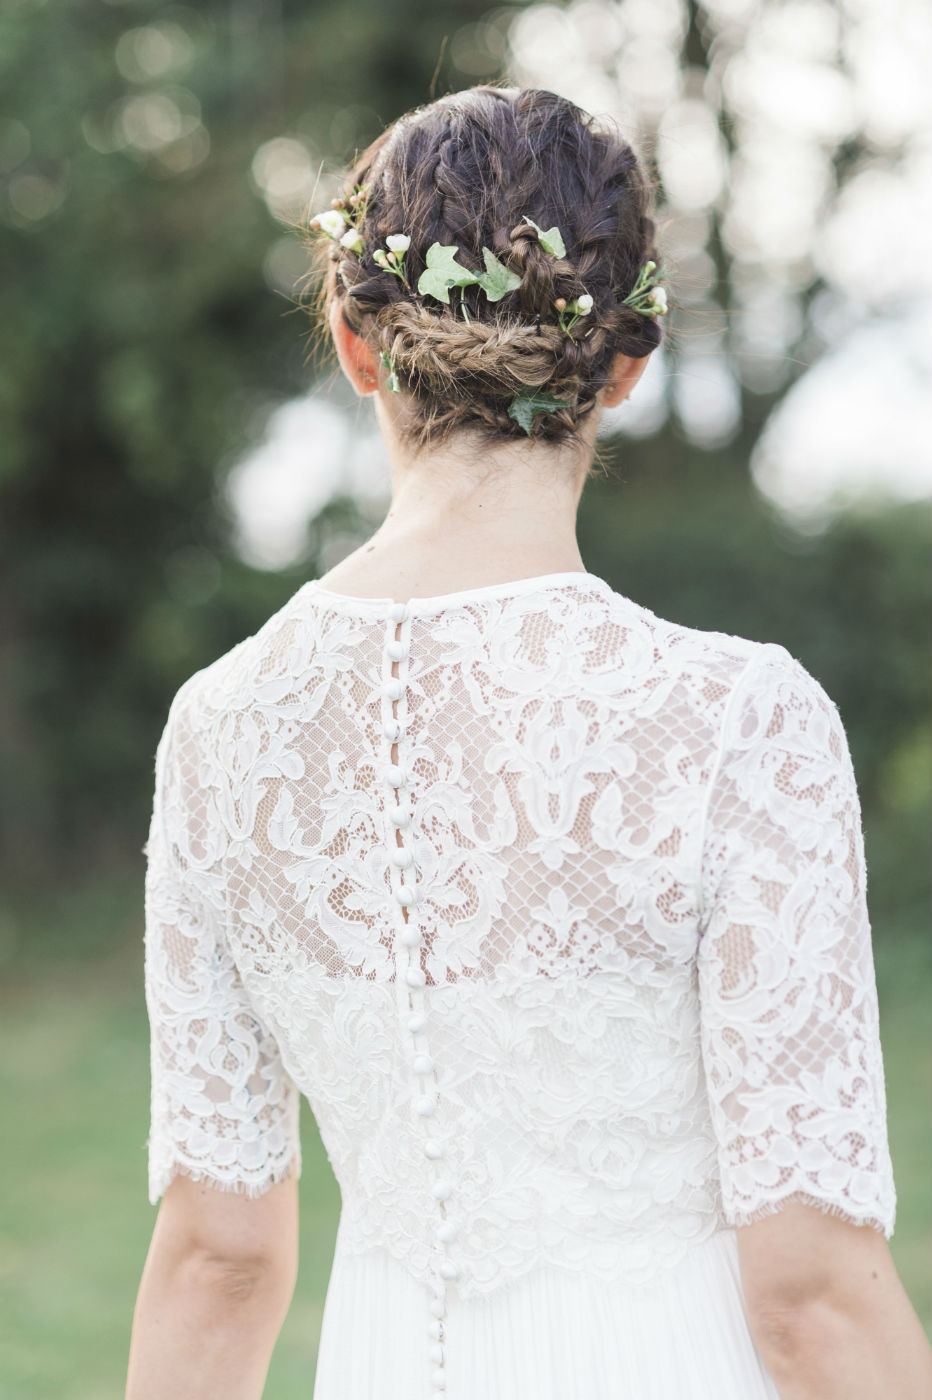 View More: http://razialife.pass.us/lily-and-richs-wedding